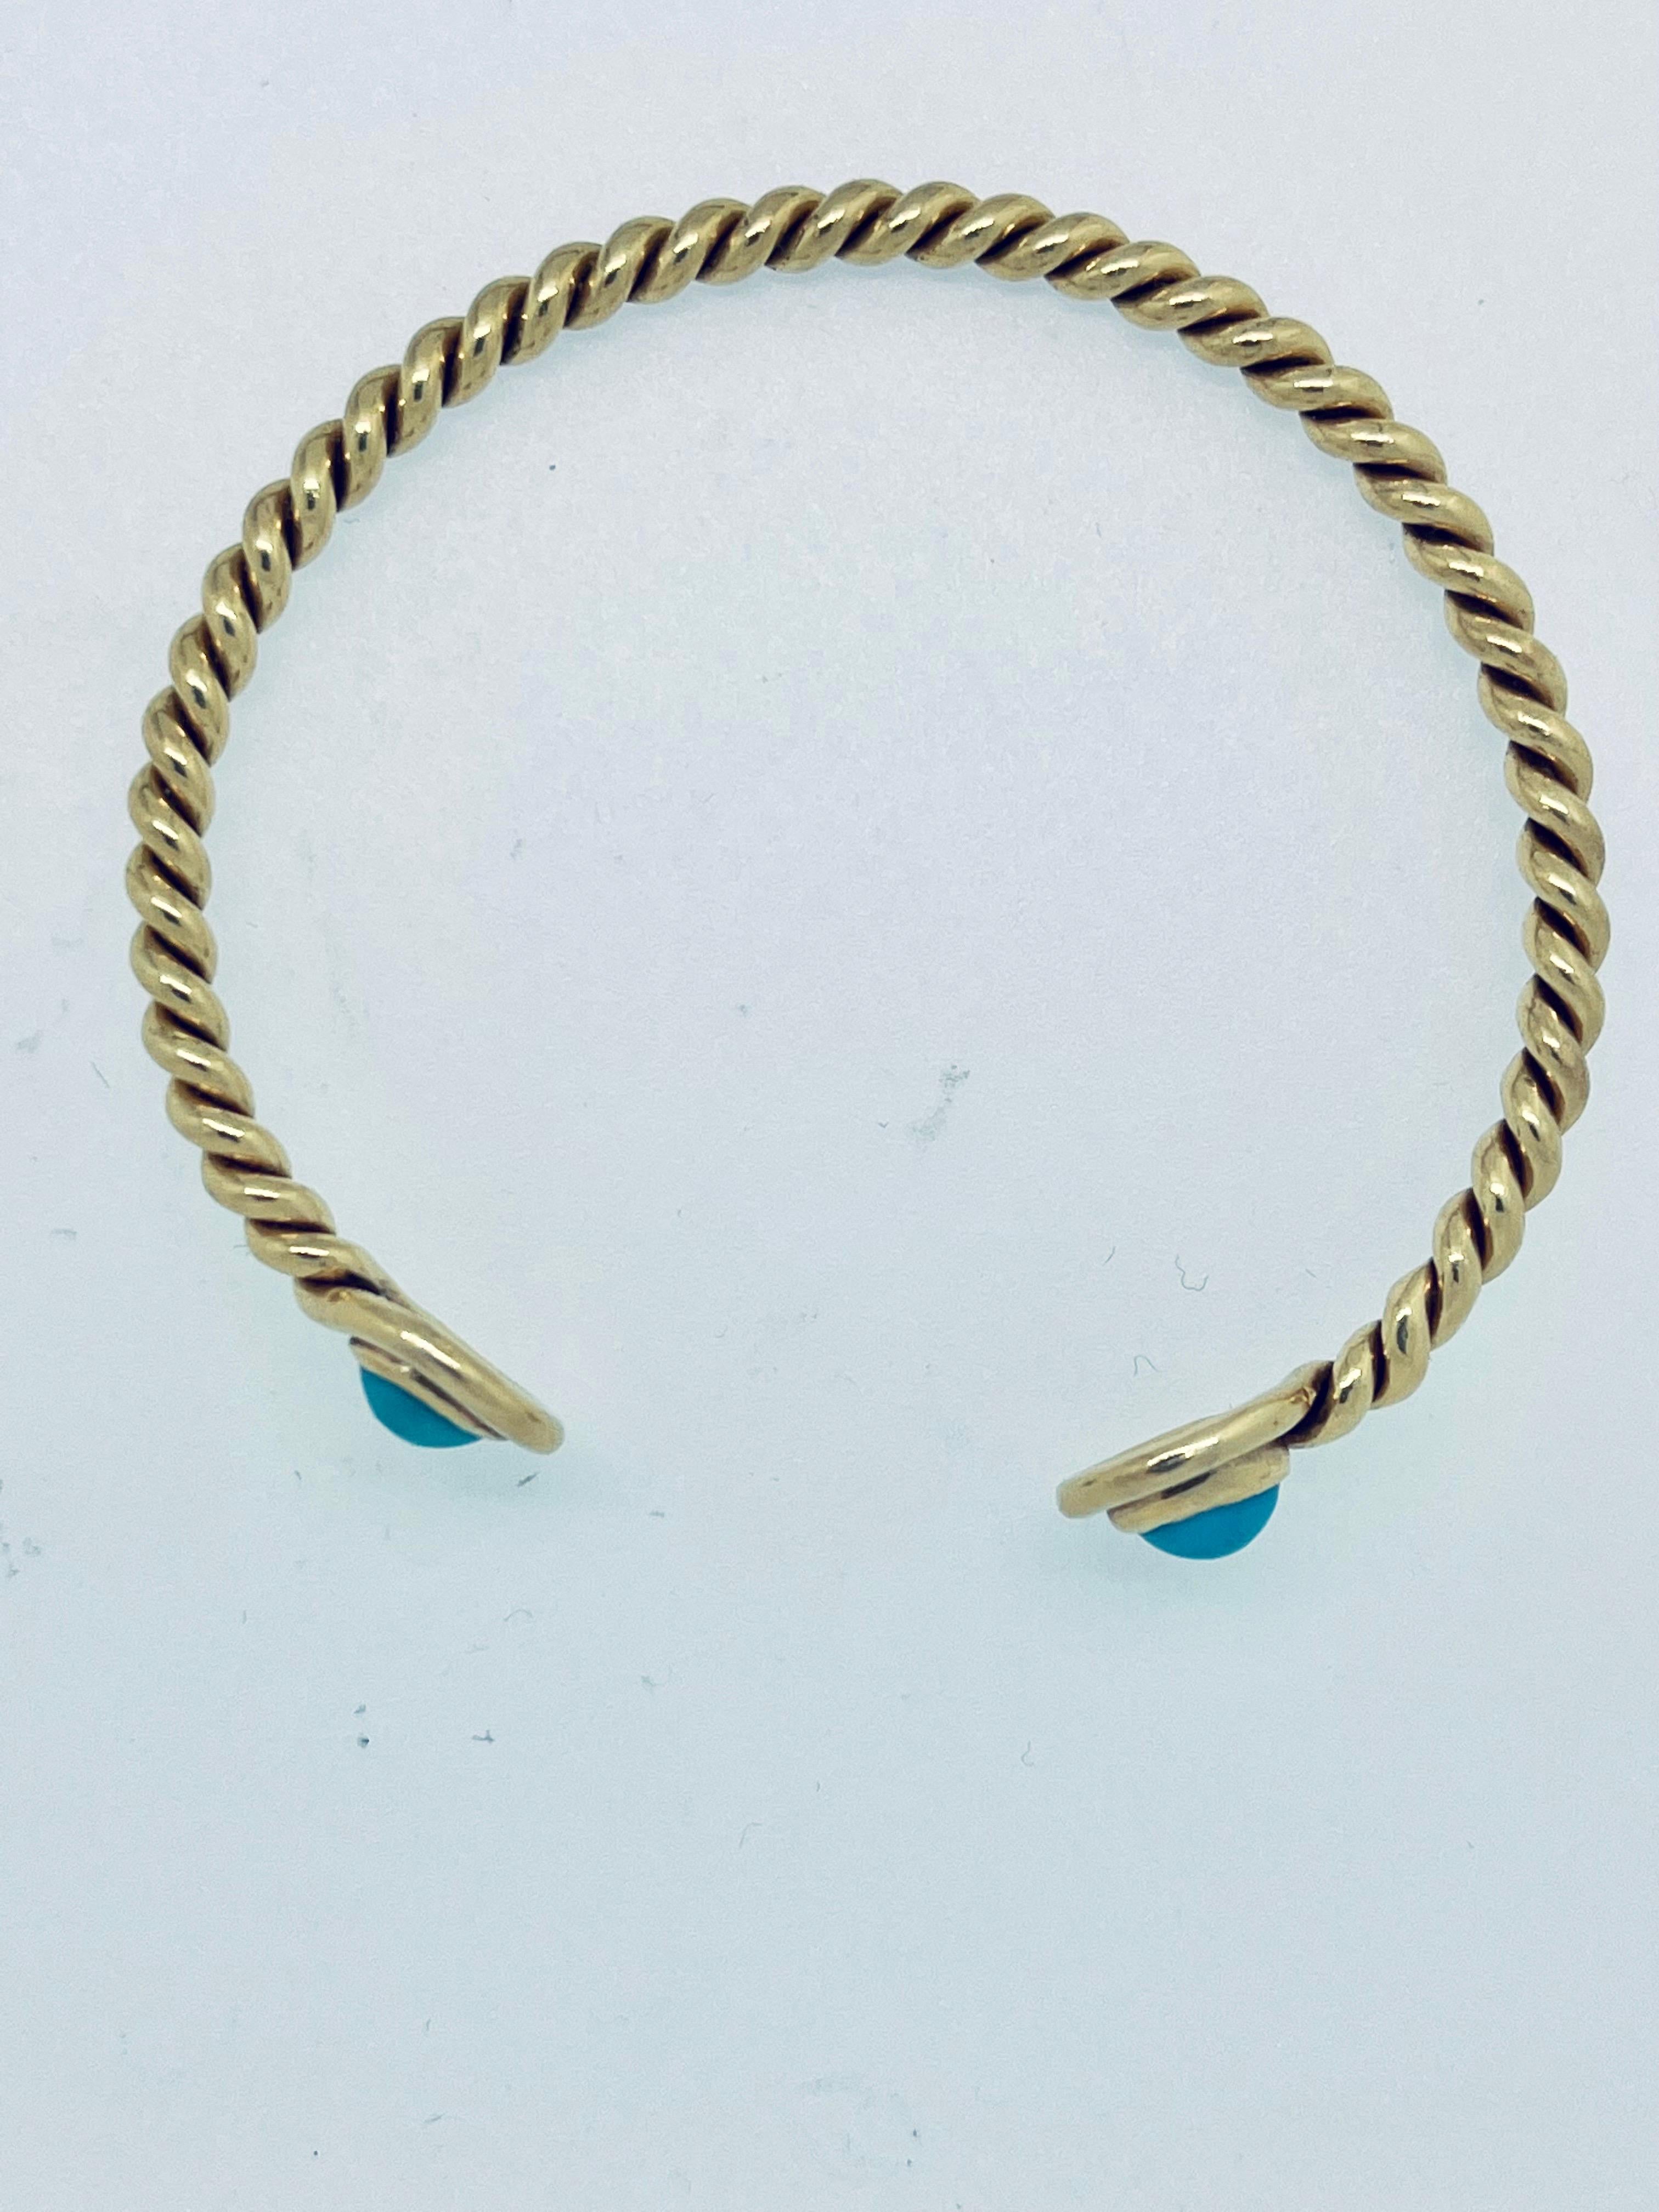 Modern 18 Carat Gold and Turquoise Bangle Bracelet, 16cm Circumference, circa 1970s For Sale